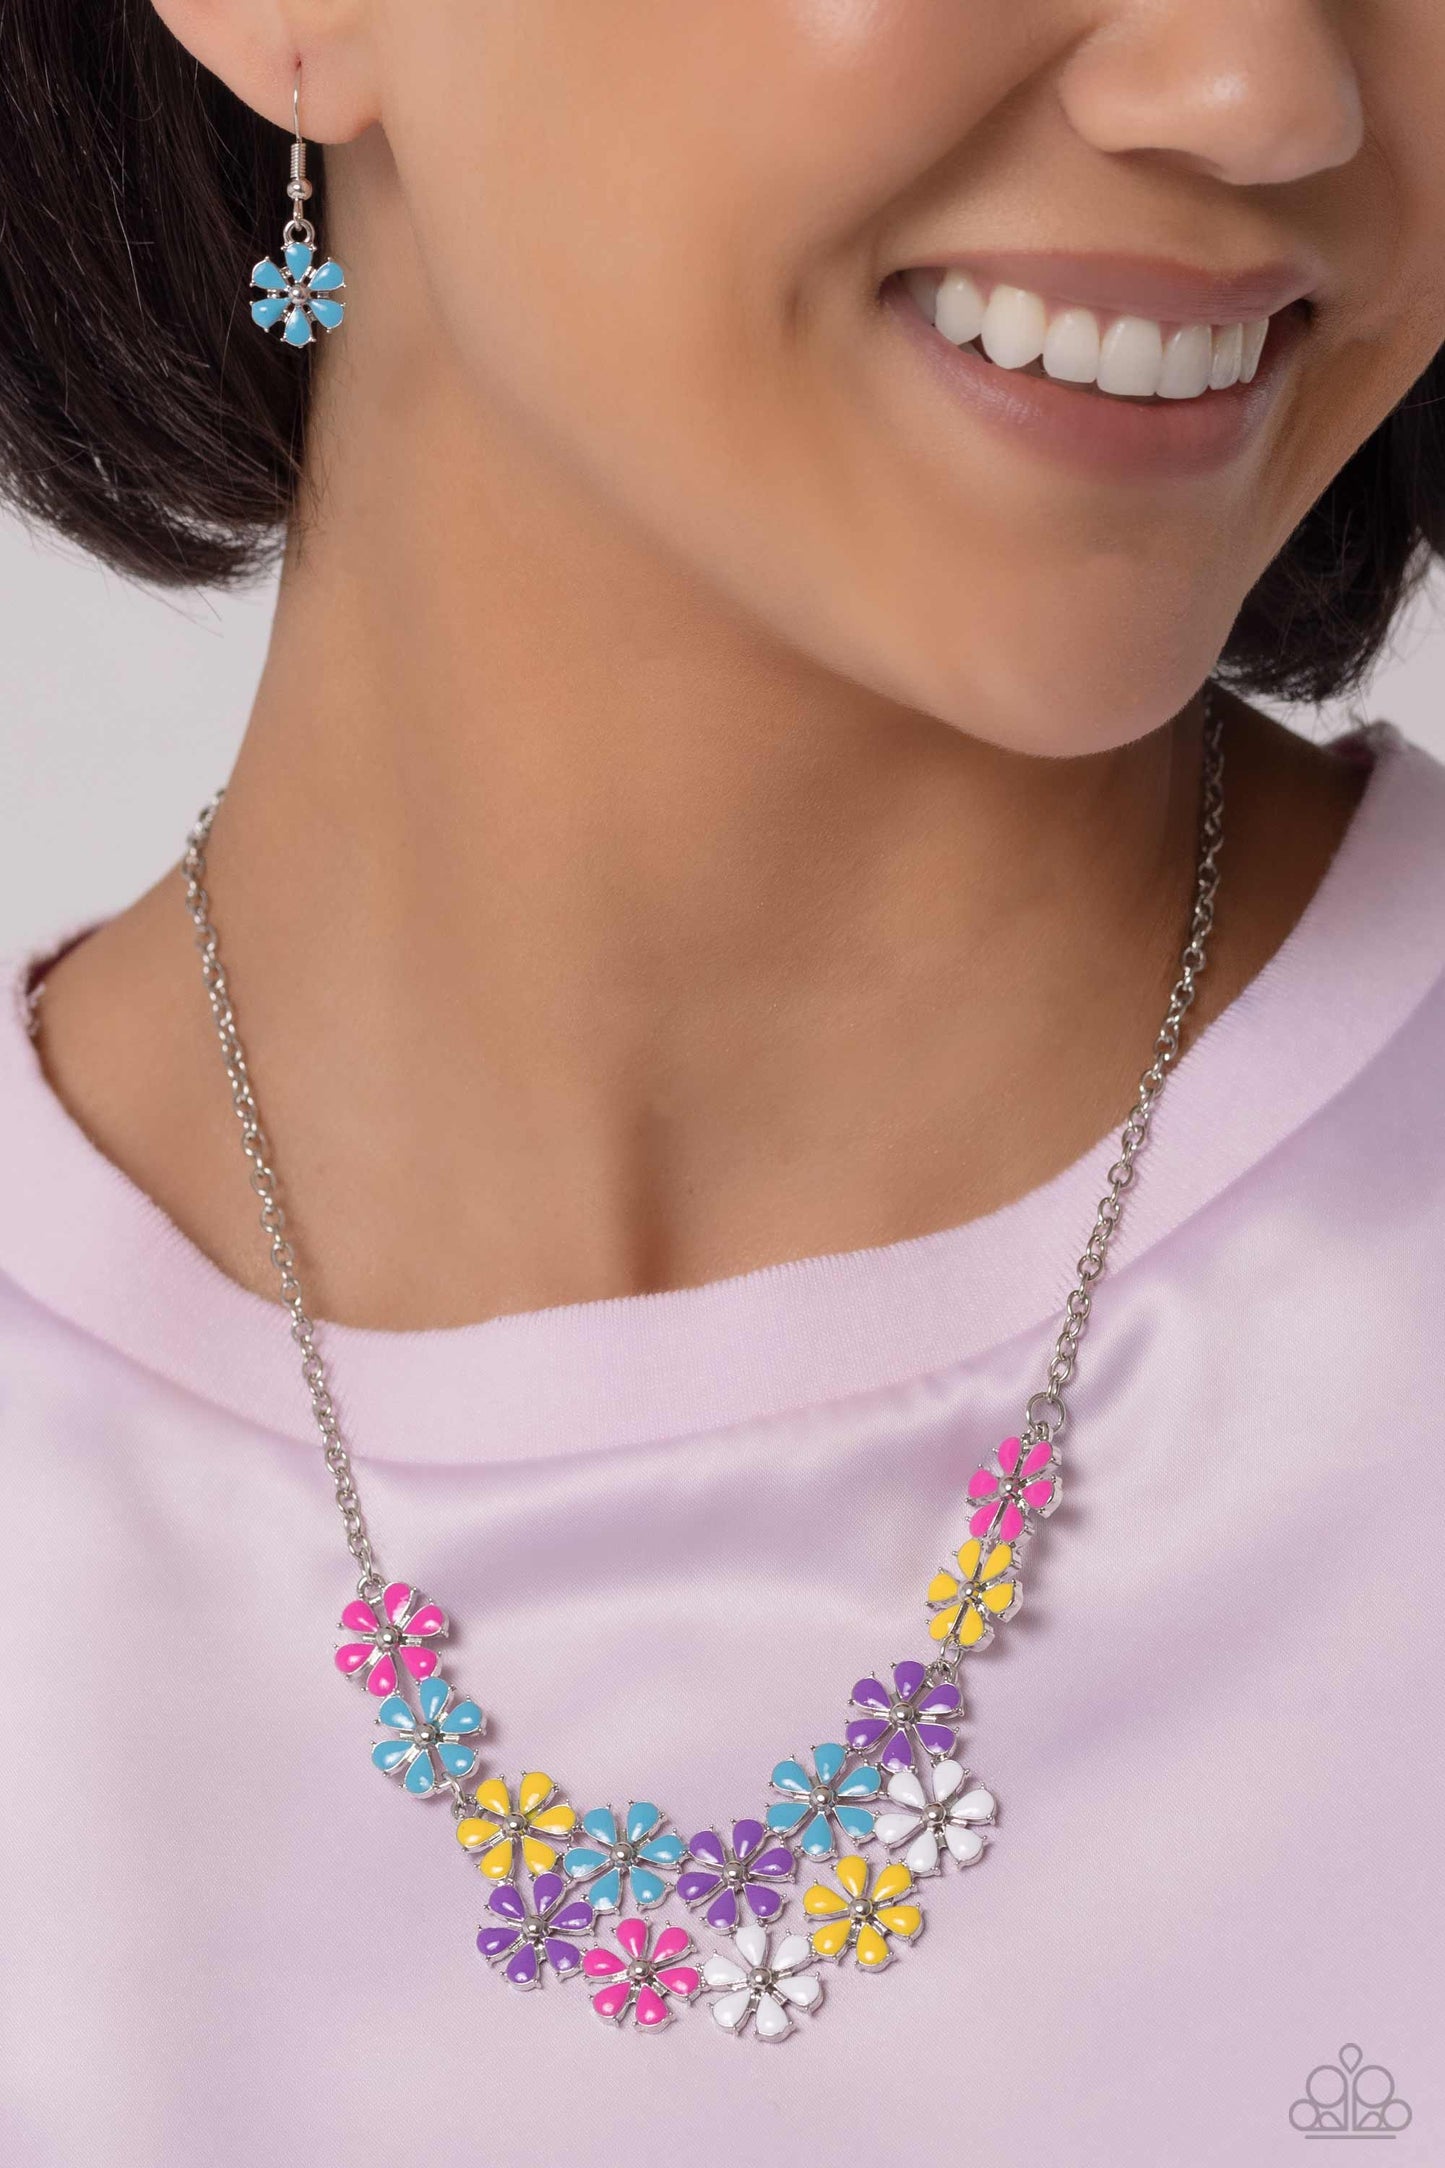 Painted in vivacious shades of hot pink, turquoise, yellow, purple, and white, a collection of silver studded flowers glide across the chest from a dainty silver chain for a whimsical array. Features an adjustable clasp closure. Painted in vivacious shades of hot pink, turquoise, yellow, purple, and white, a collection of silver studded flowers glide across the chest from a dainty silver chain for a whimsical array. Features an adjustable clasp closure.  Featured inside The Preview at Made for More!